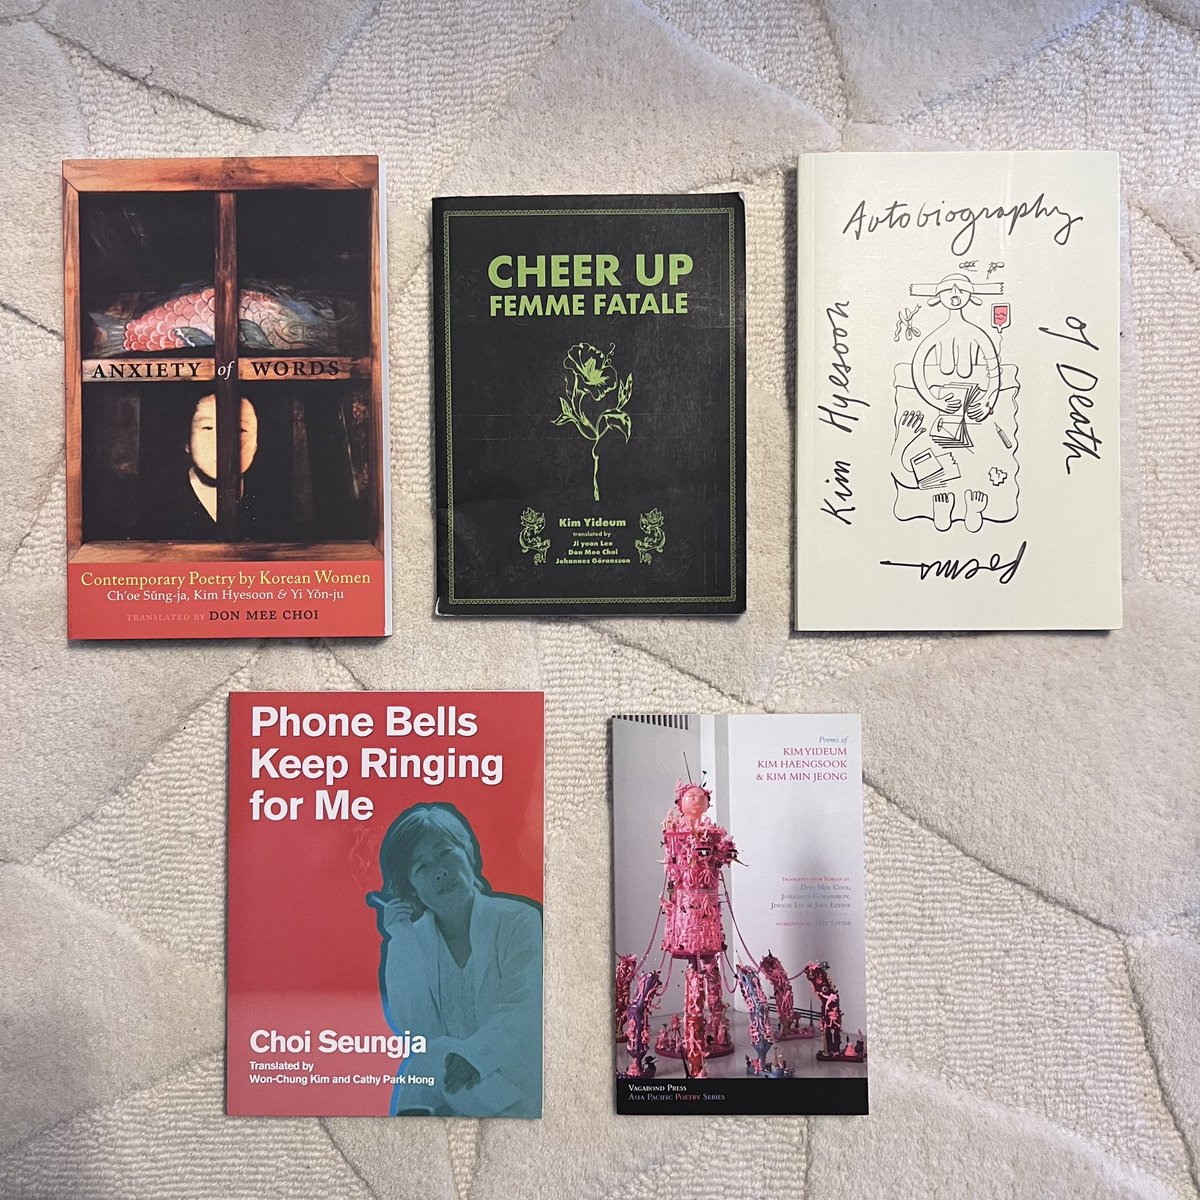 I love these ferocious books by brazenly feminist Korean women poets such as @PoetKimHyesoon translated by Korean American poets such as @DonMeeChoi & @cathyparkhong. They smash open boundaries & cultural expectations. My poems would not exist as they are without them.